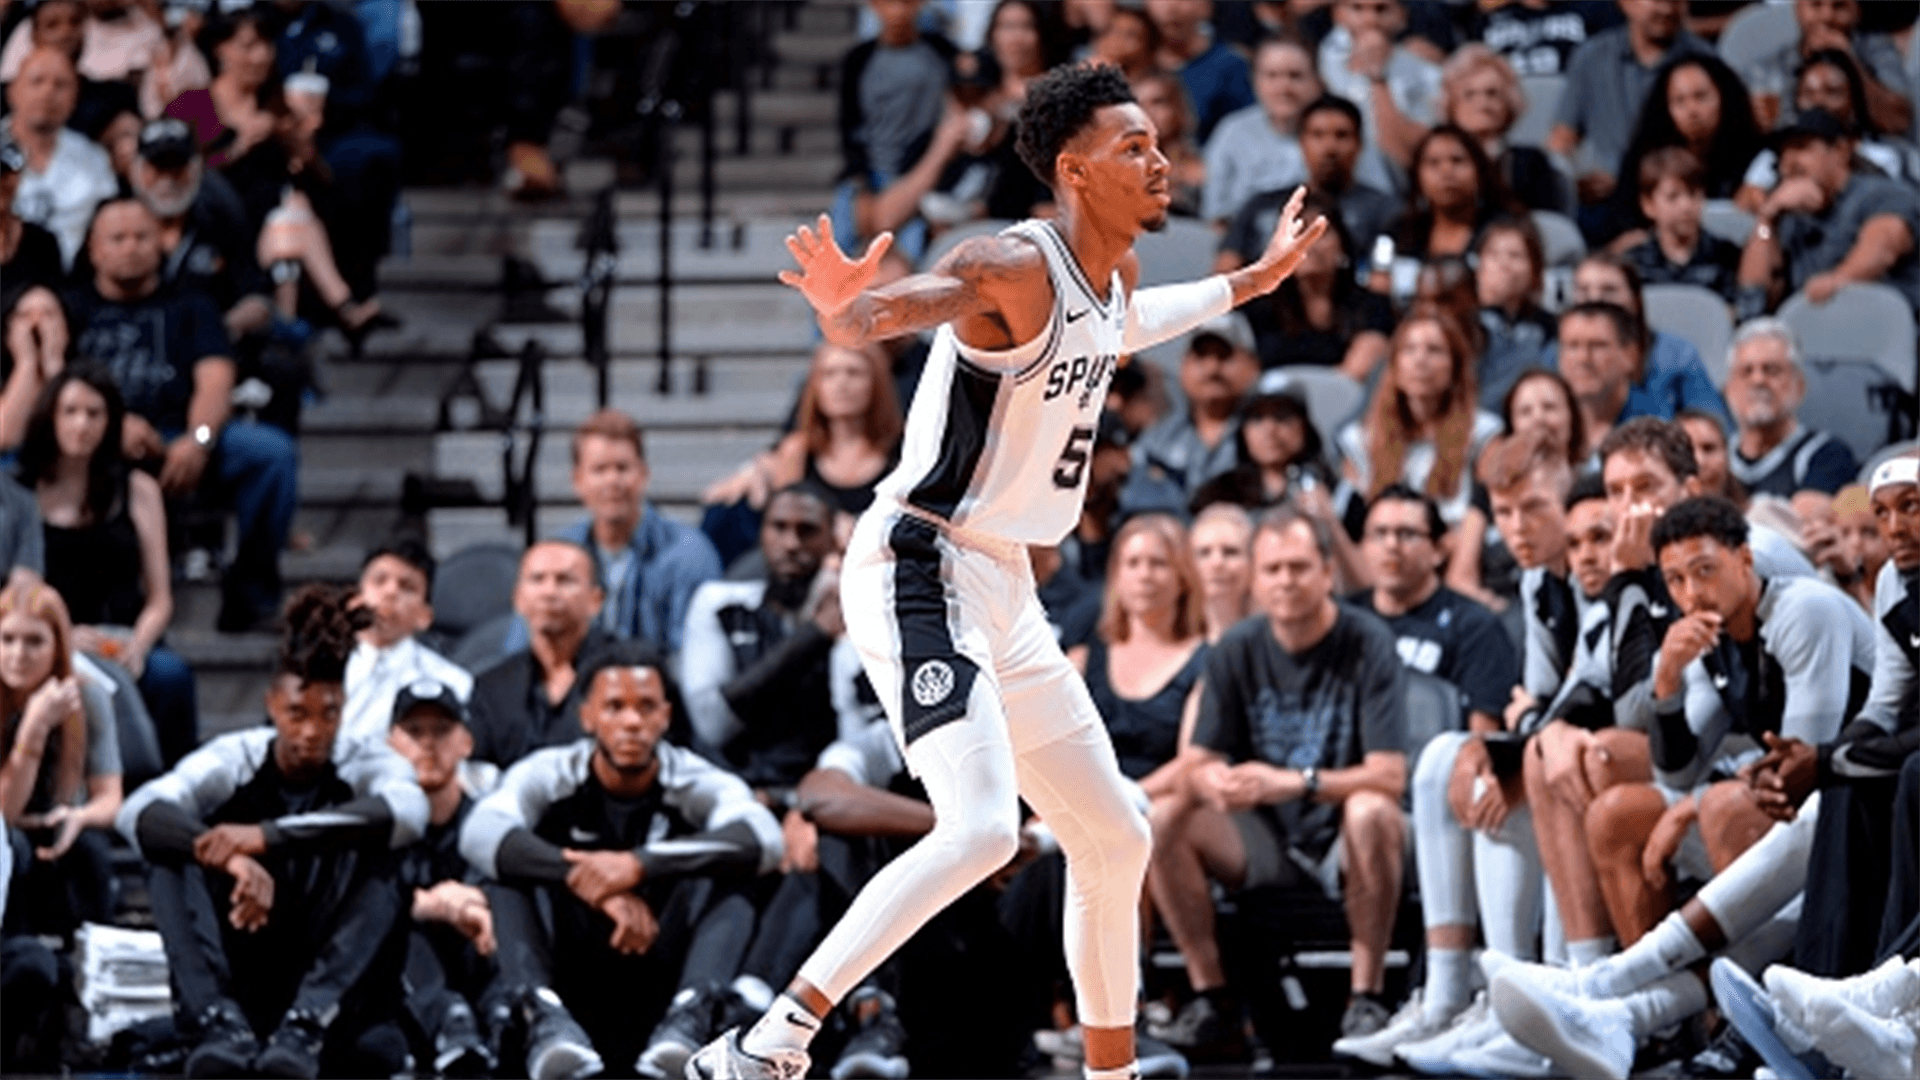 Report: Dejounte Murray tears ACL, sidelined indefinitely. Sporting